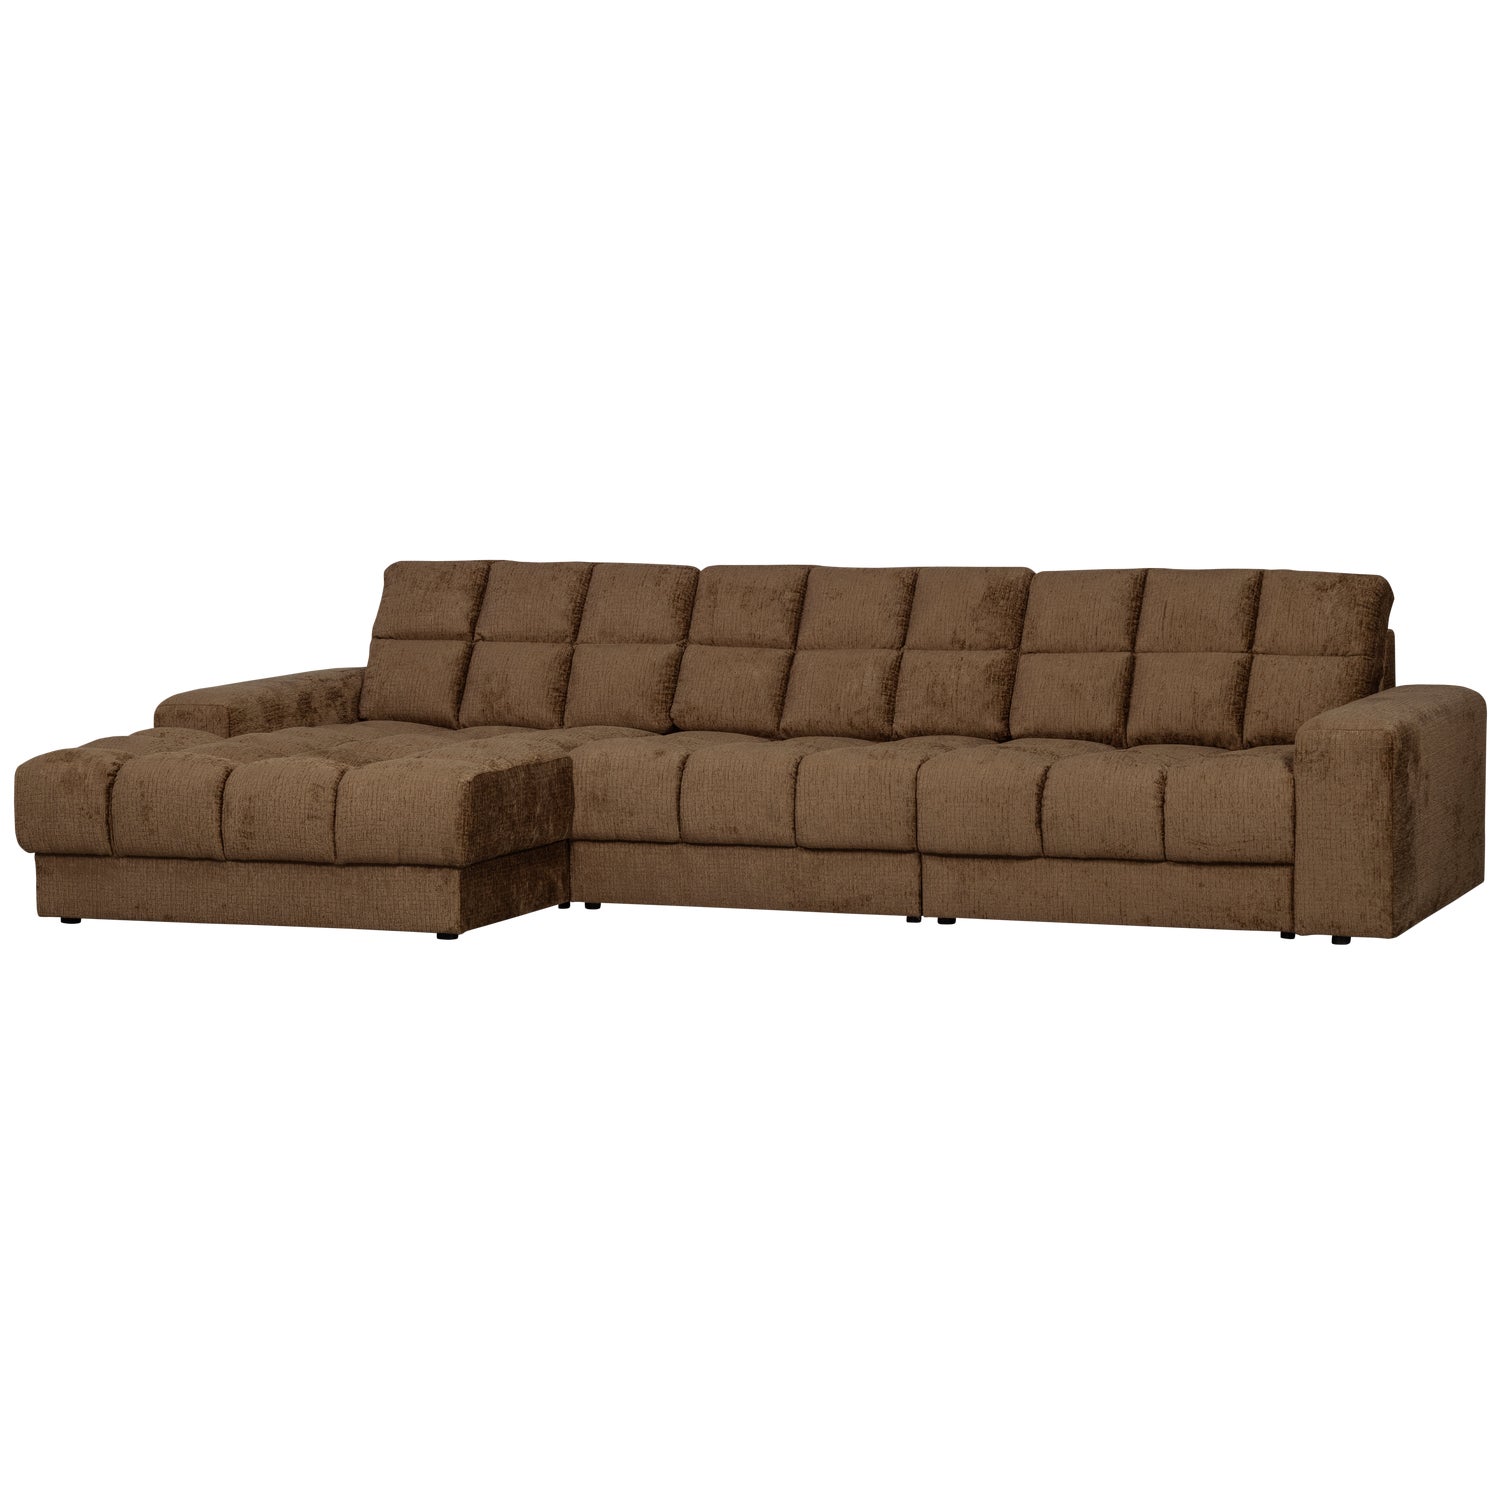 379012-BR-02_VS_WE_Second_date_chaise_longue_links_structure_velvet_brass_SA.png?auto=webp&format=png&width=1500&height=1500